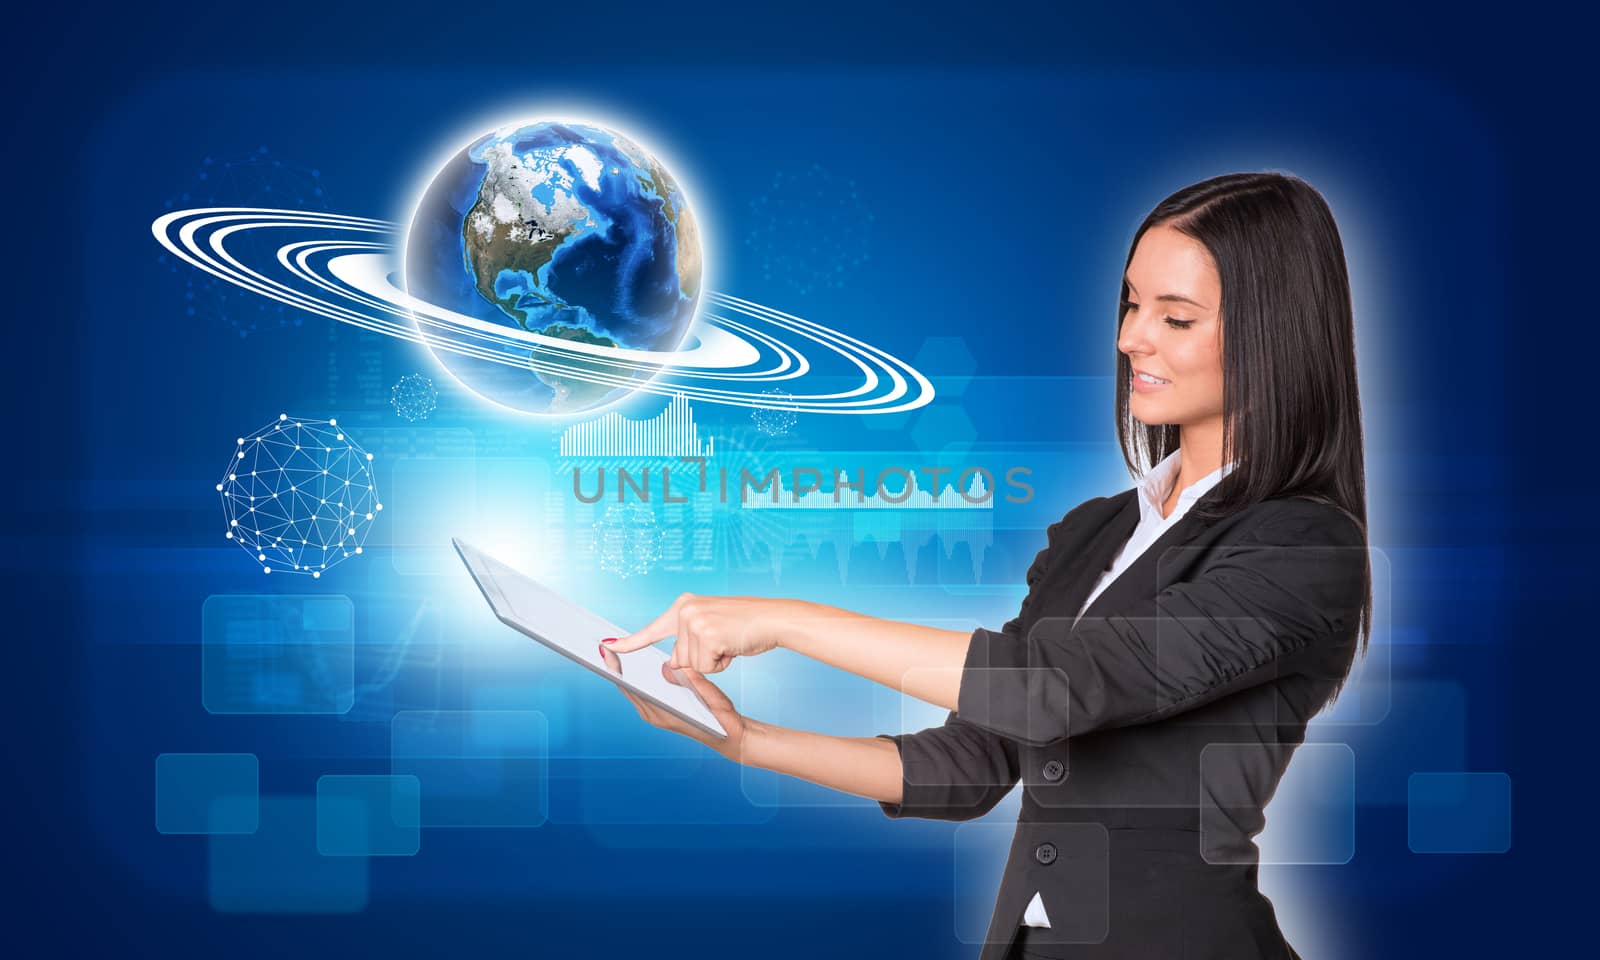 Beautiful businesswomen in suit using digital tablet. Earth with rectangles, graphs and wire-frame spheres. Element of this image furnished by NASA